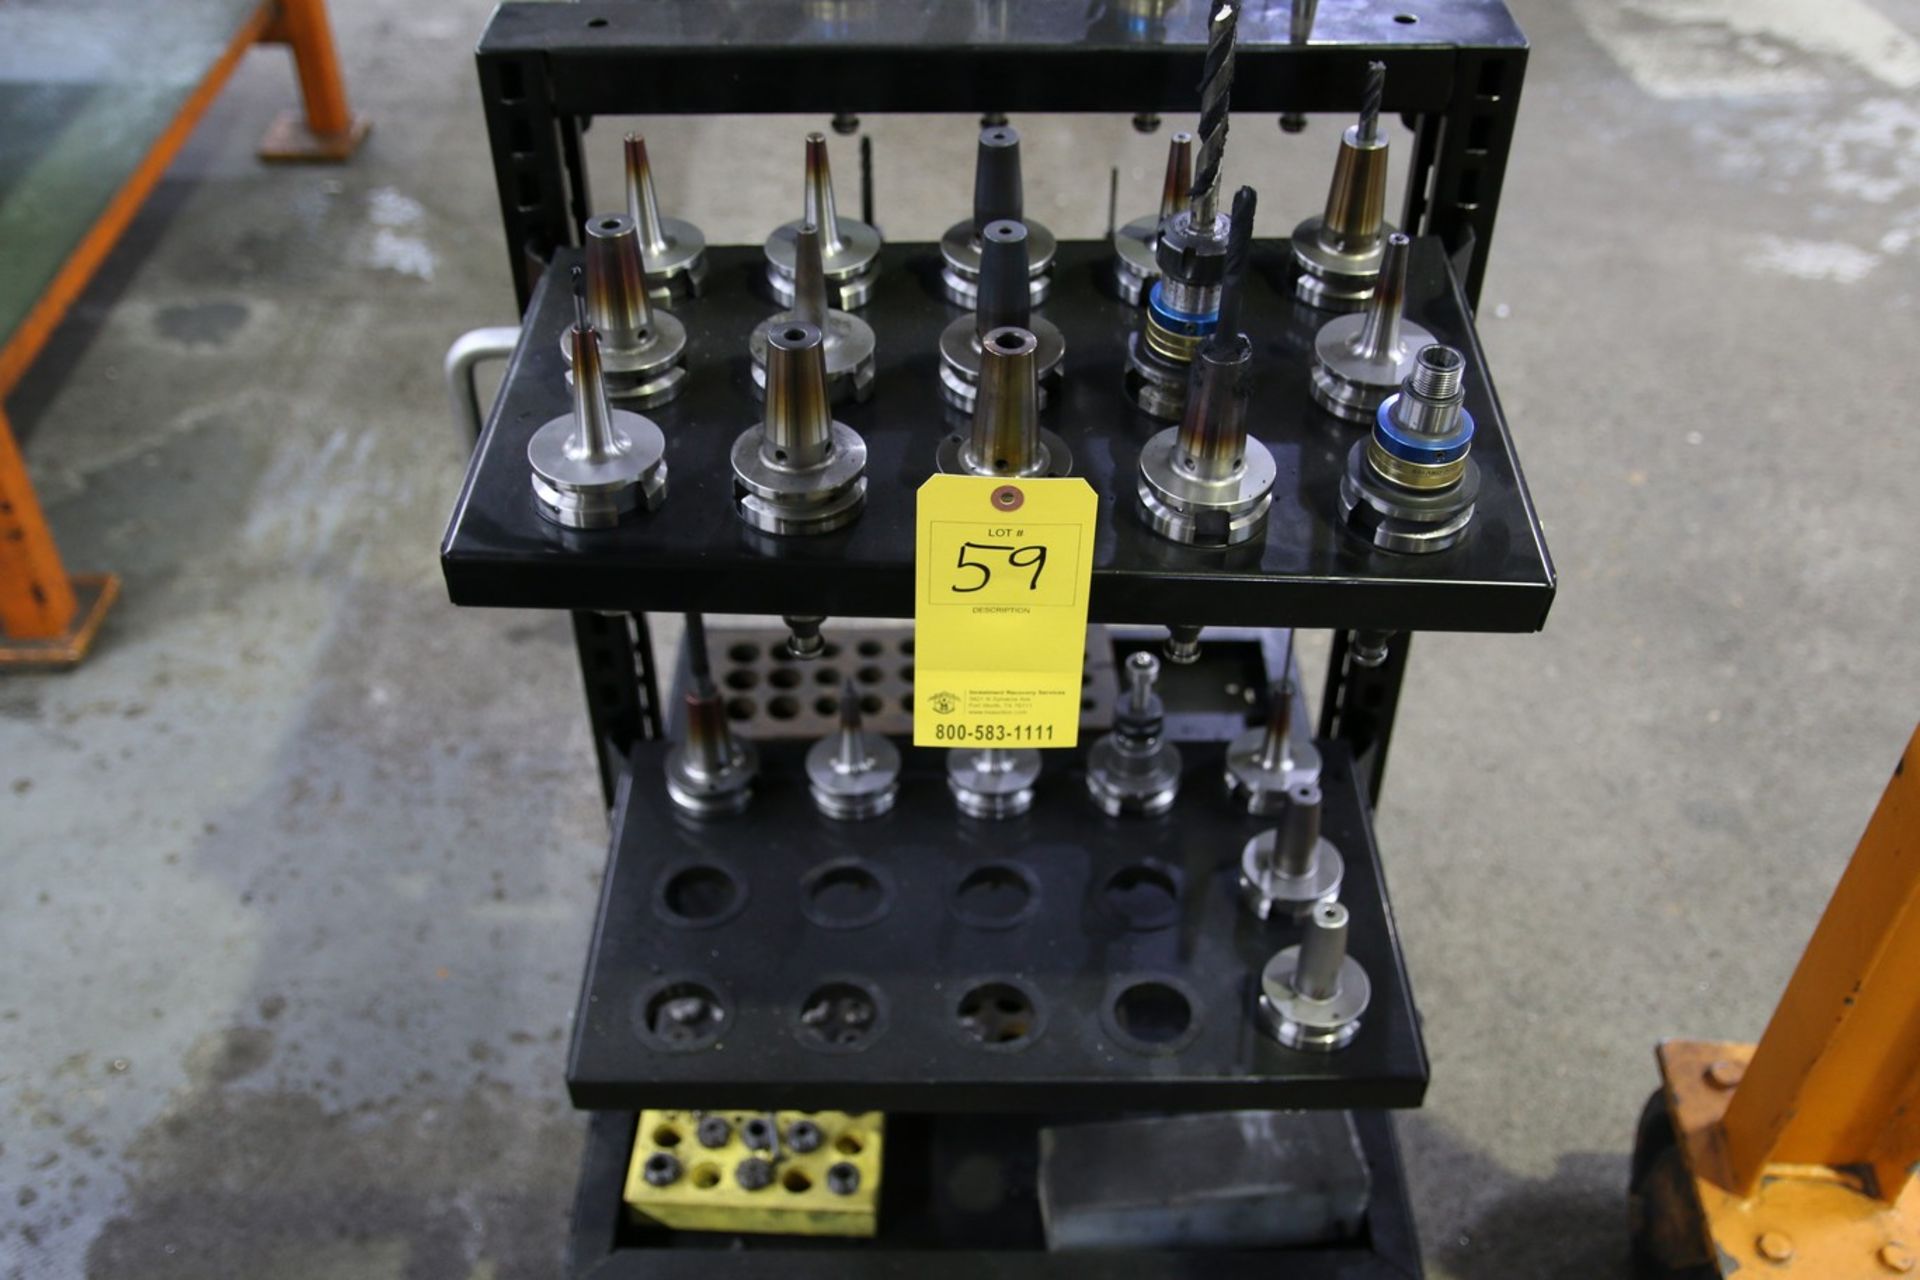 Cat 40 Tool Holders Lot of (22) Cat 40 Tool Holders, Some with Tooling, with Tool Holder Cart